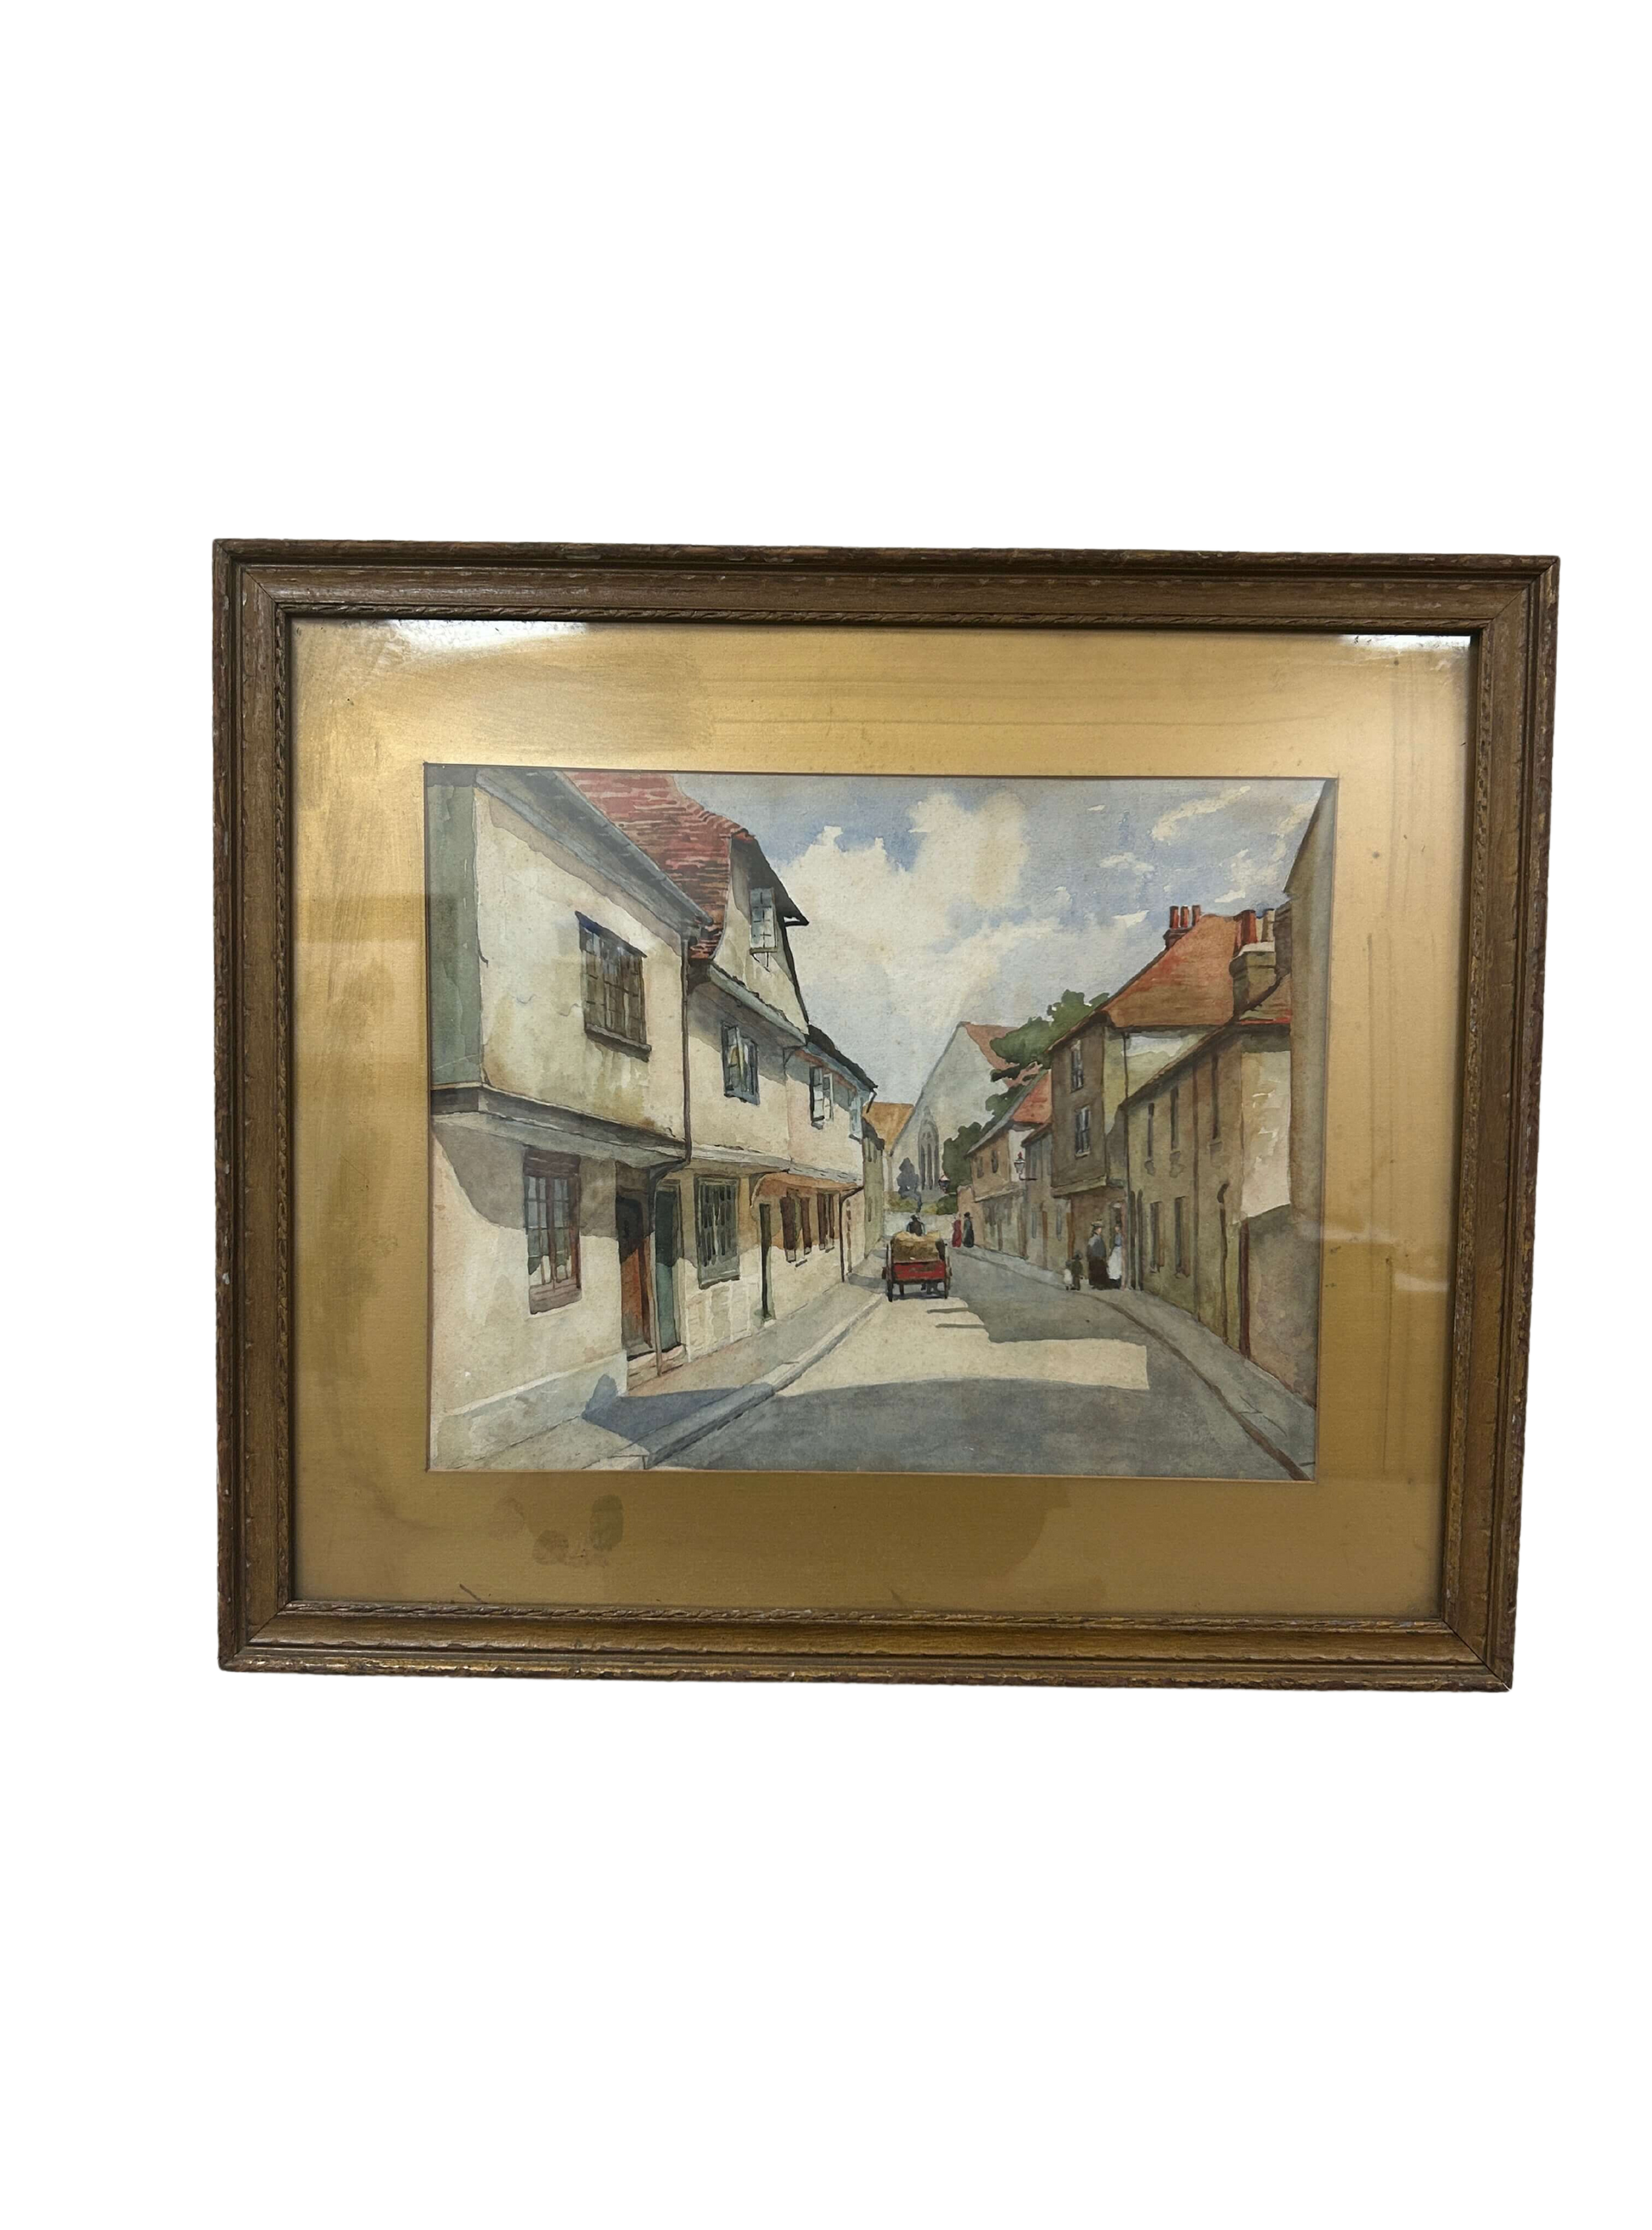 This framed masterpiece skillfully depicts a window scene against a wooden backdrop, blending nature and art, and invites viewers into a world of imagination, available at the hearing clinic at Allard Audiology.